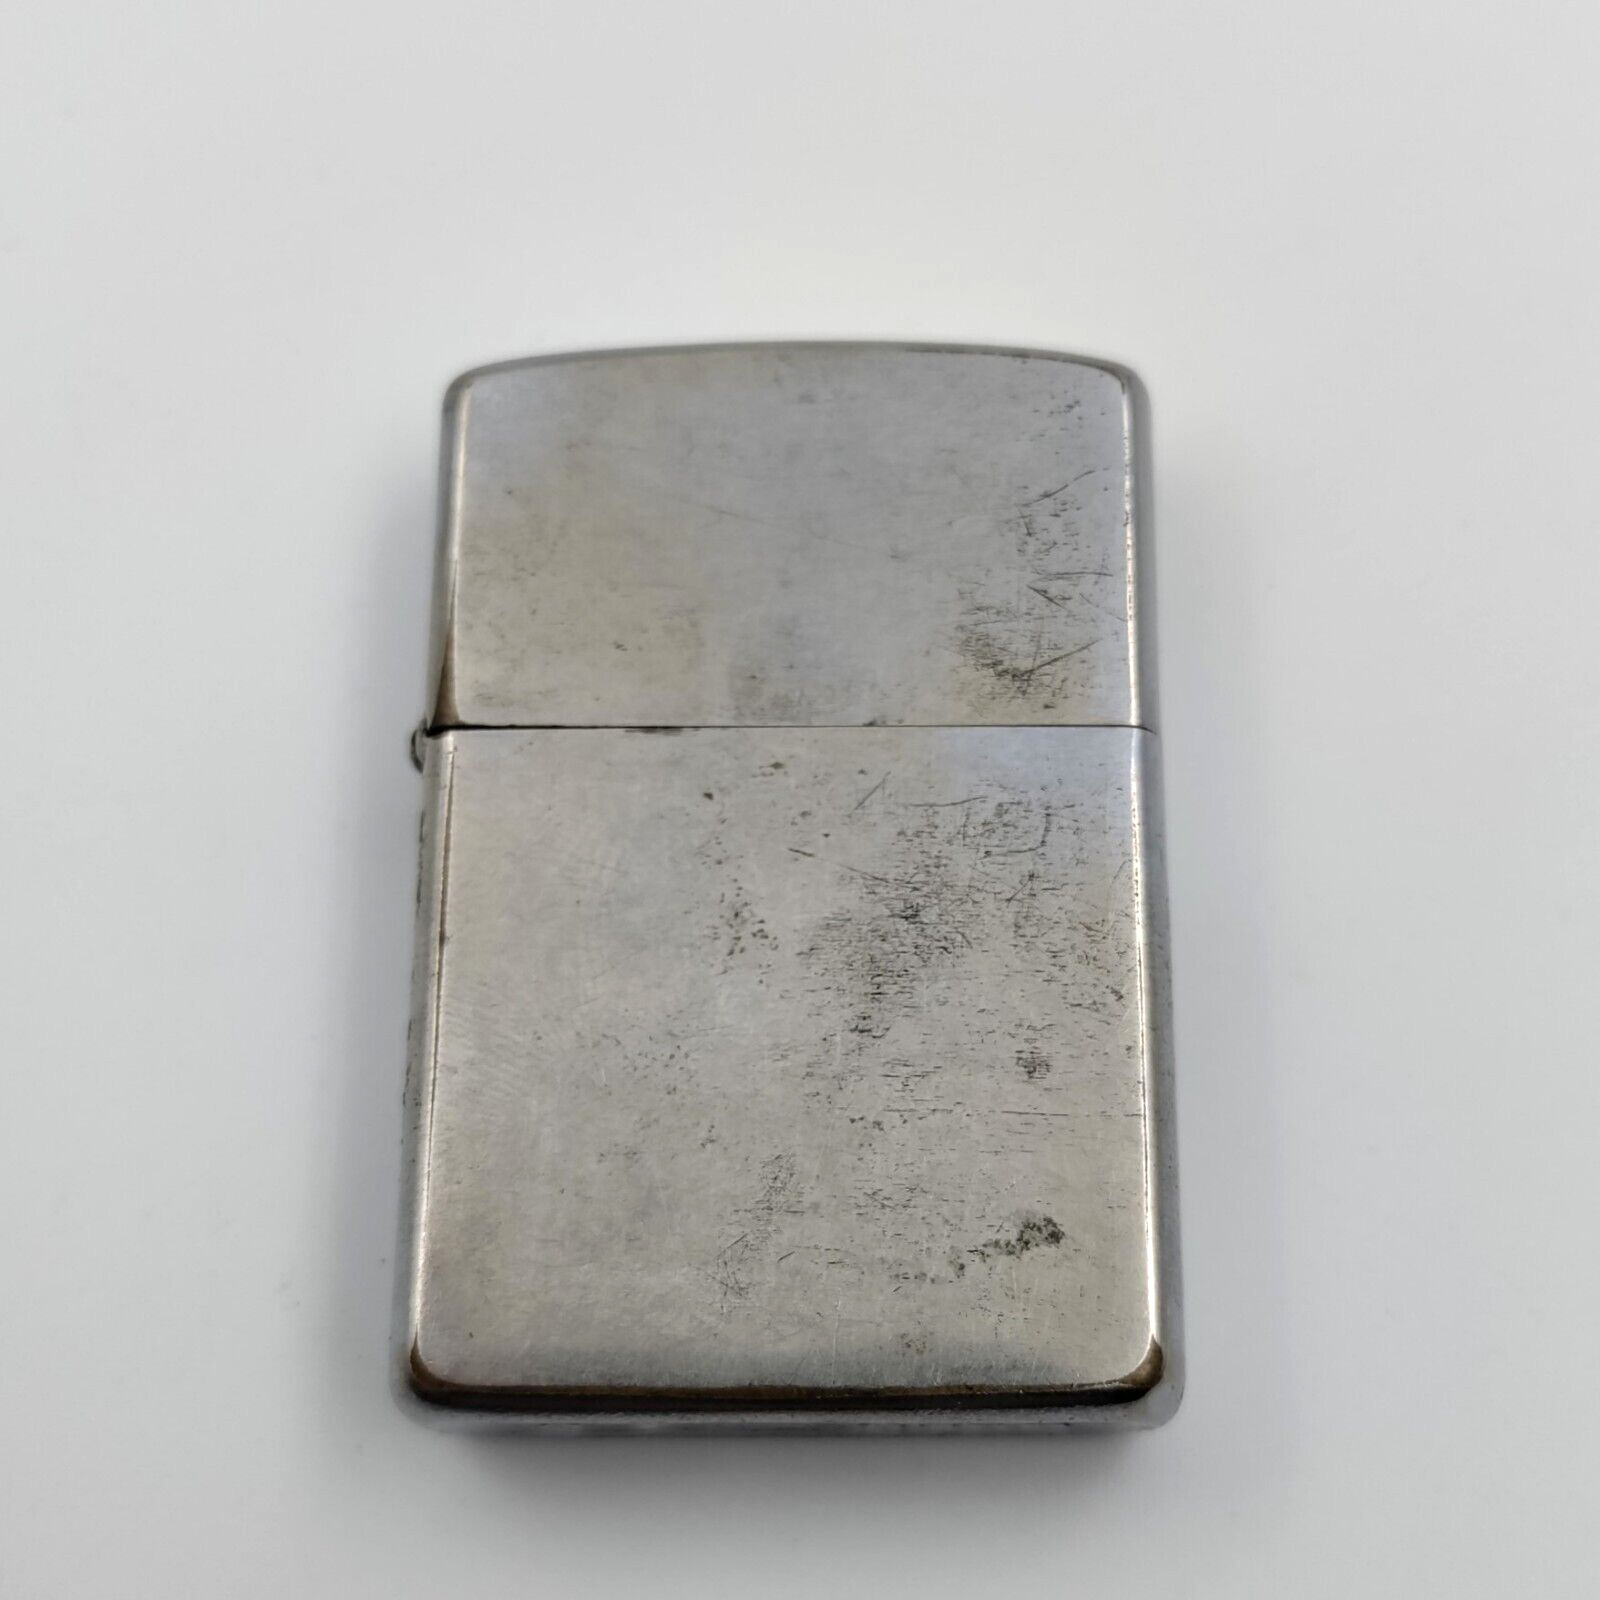 Zippo Vintage 1966 Brushed Chrome Lighter Pat. 2517191 All Original Working Cond